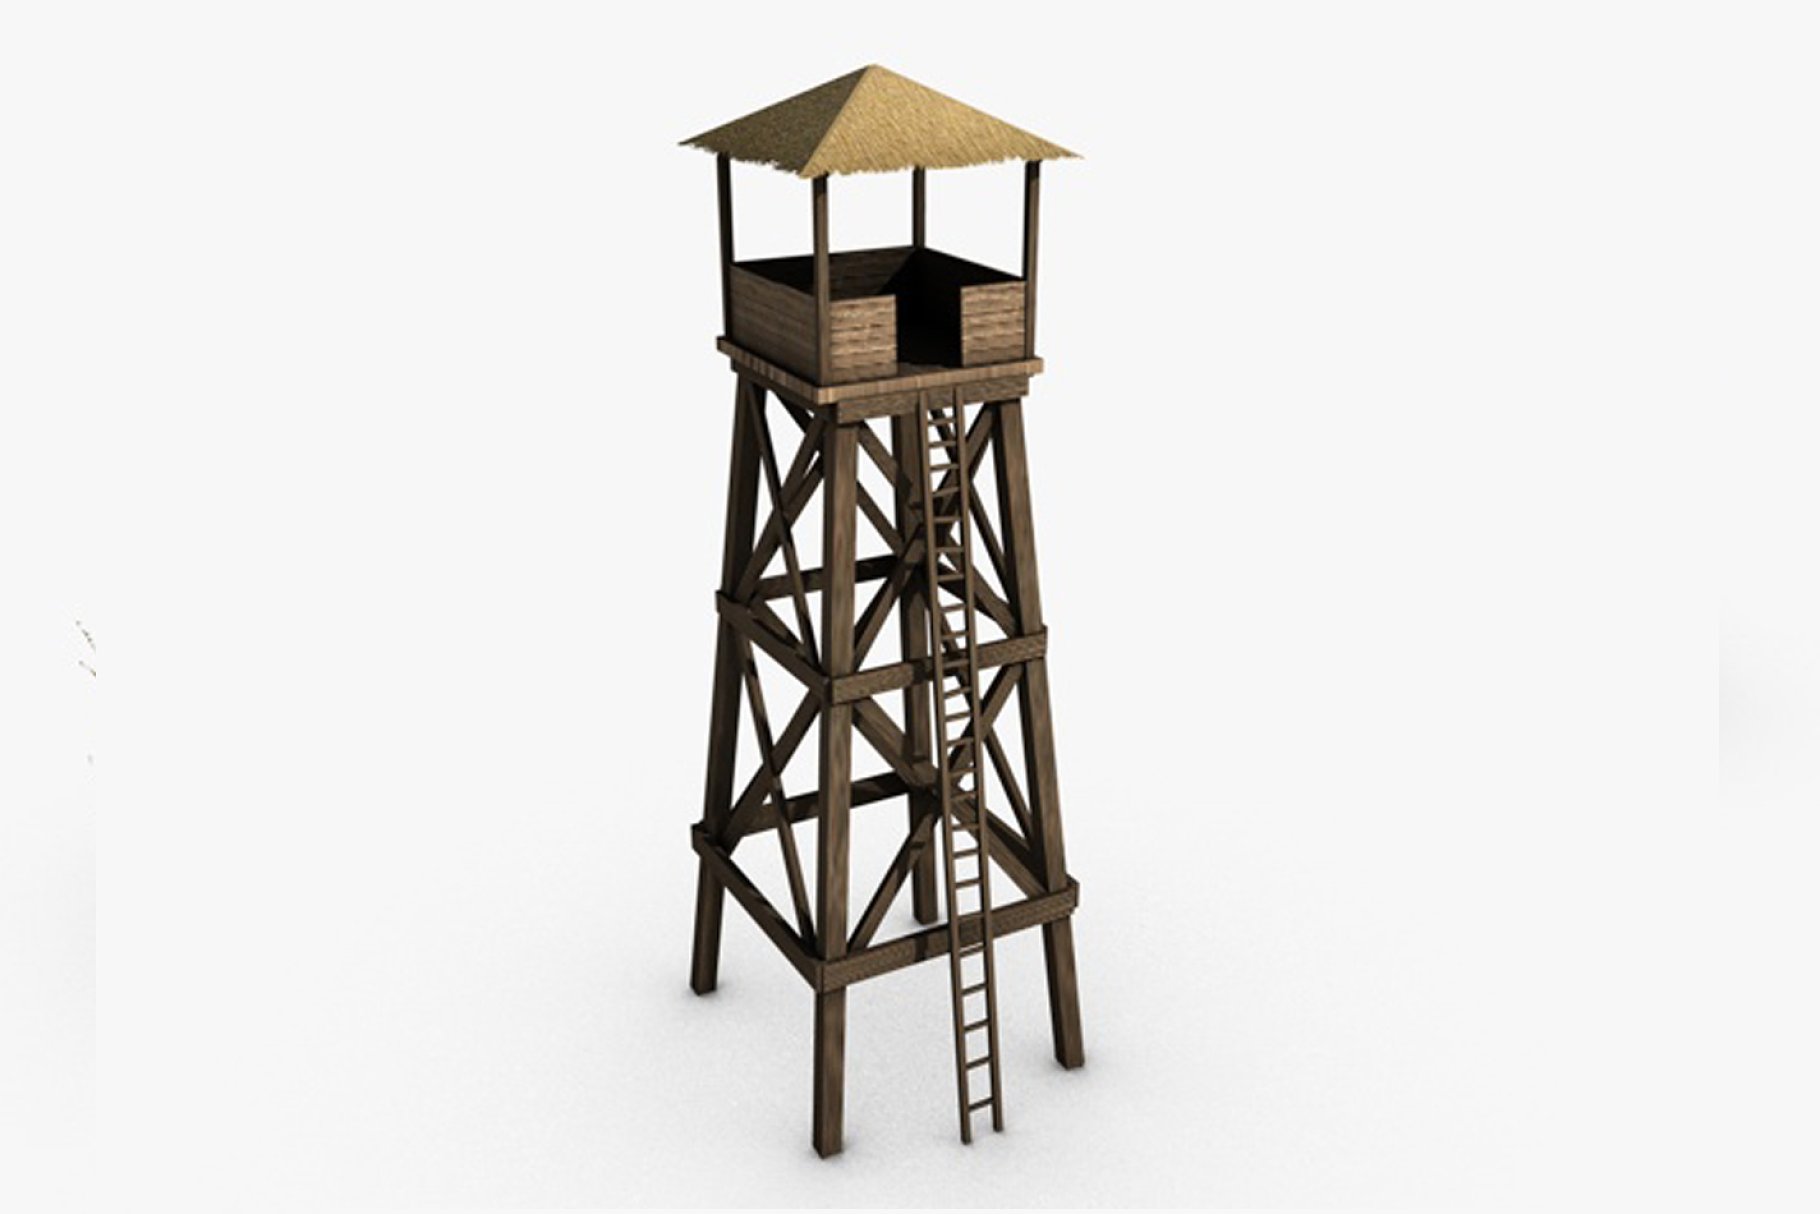 Brown low poly watchtower mockup on a gray background.